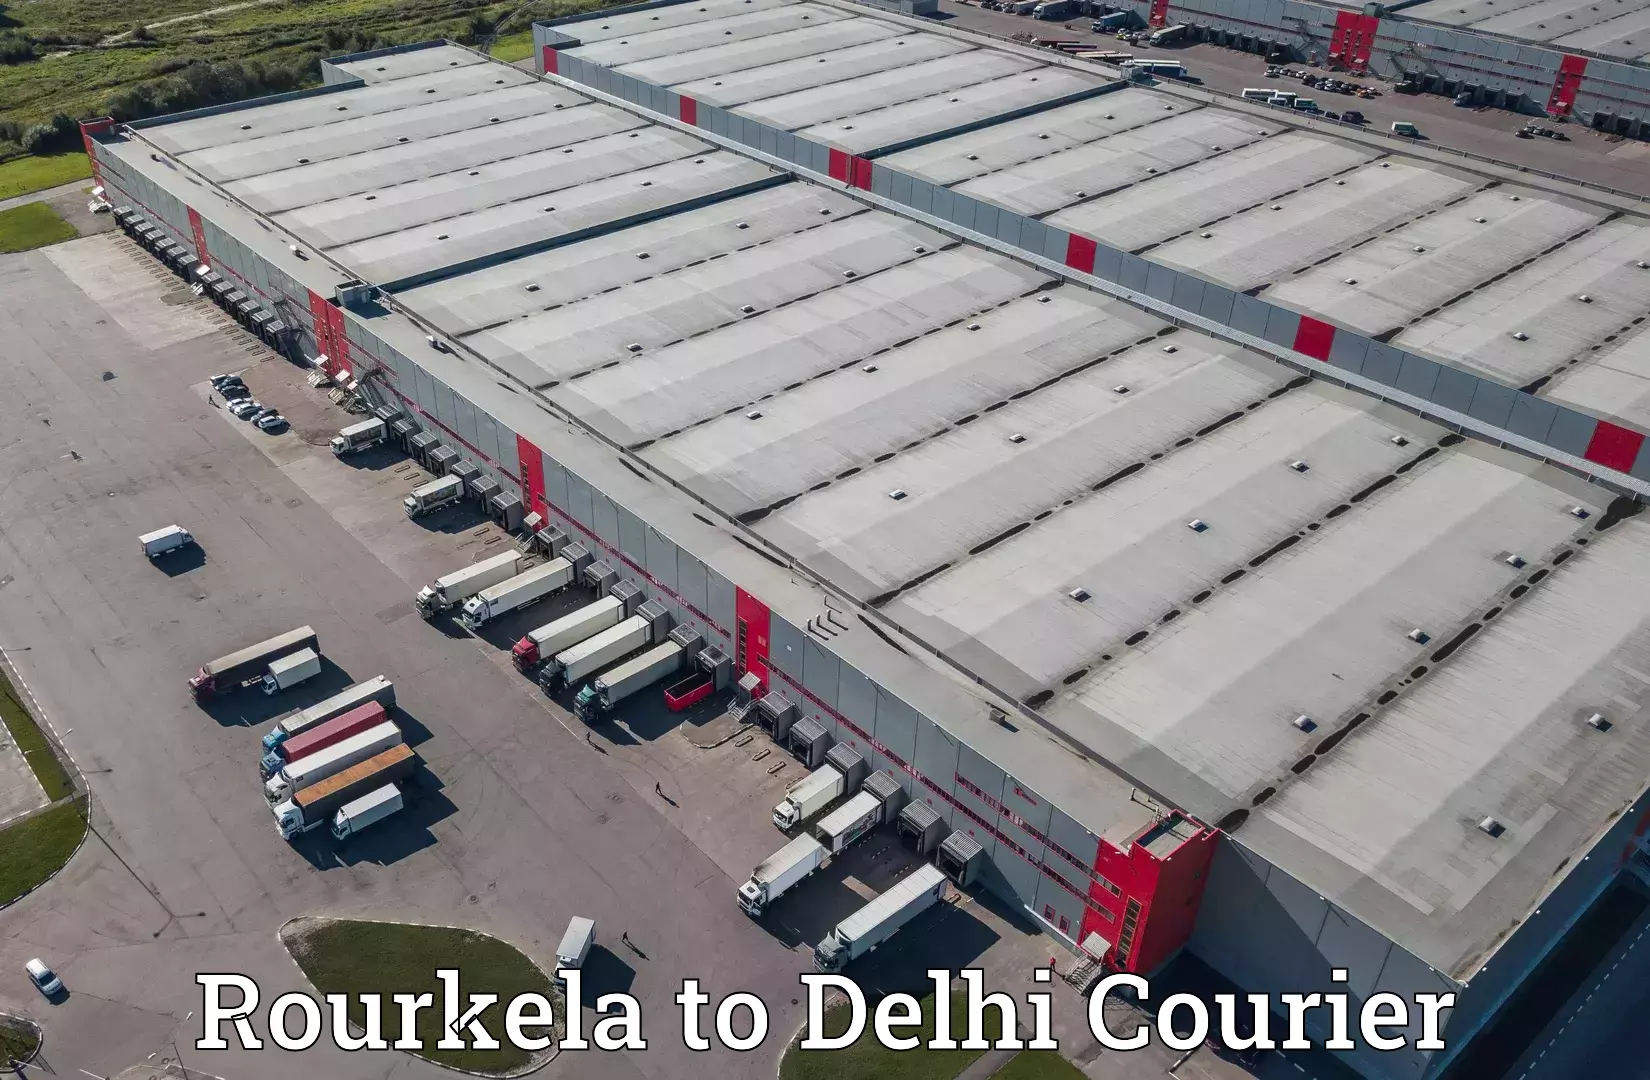 24/7 shipping services Rourkela to NCR